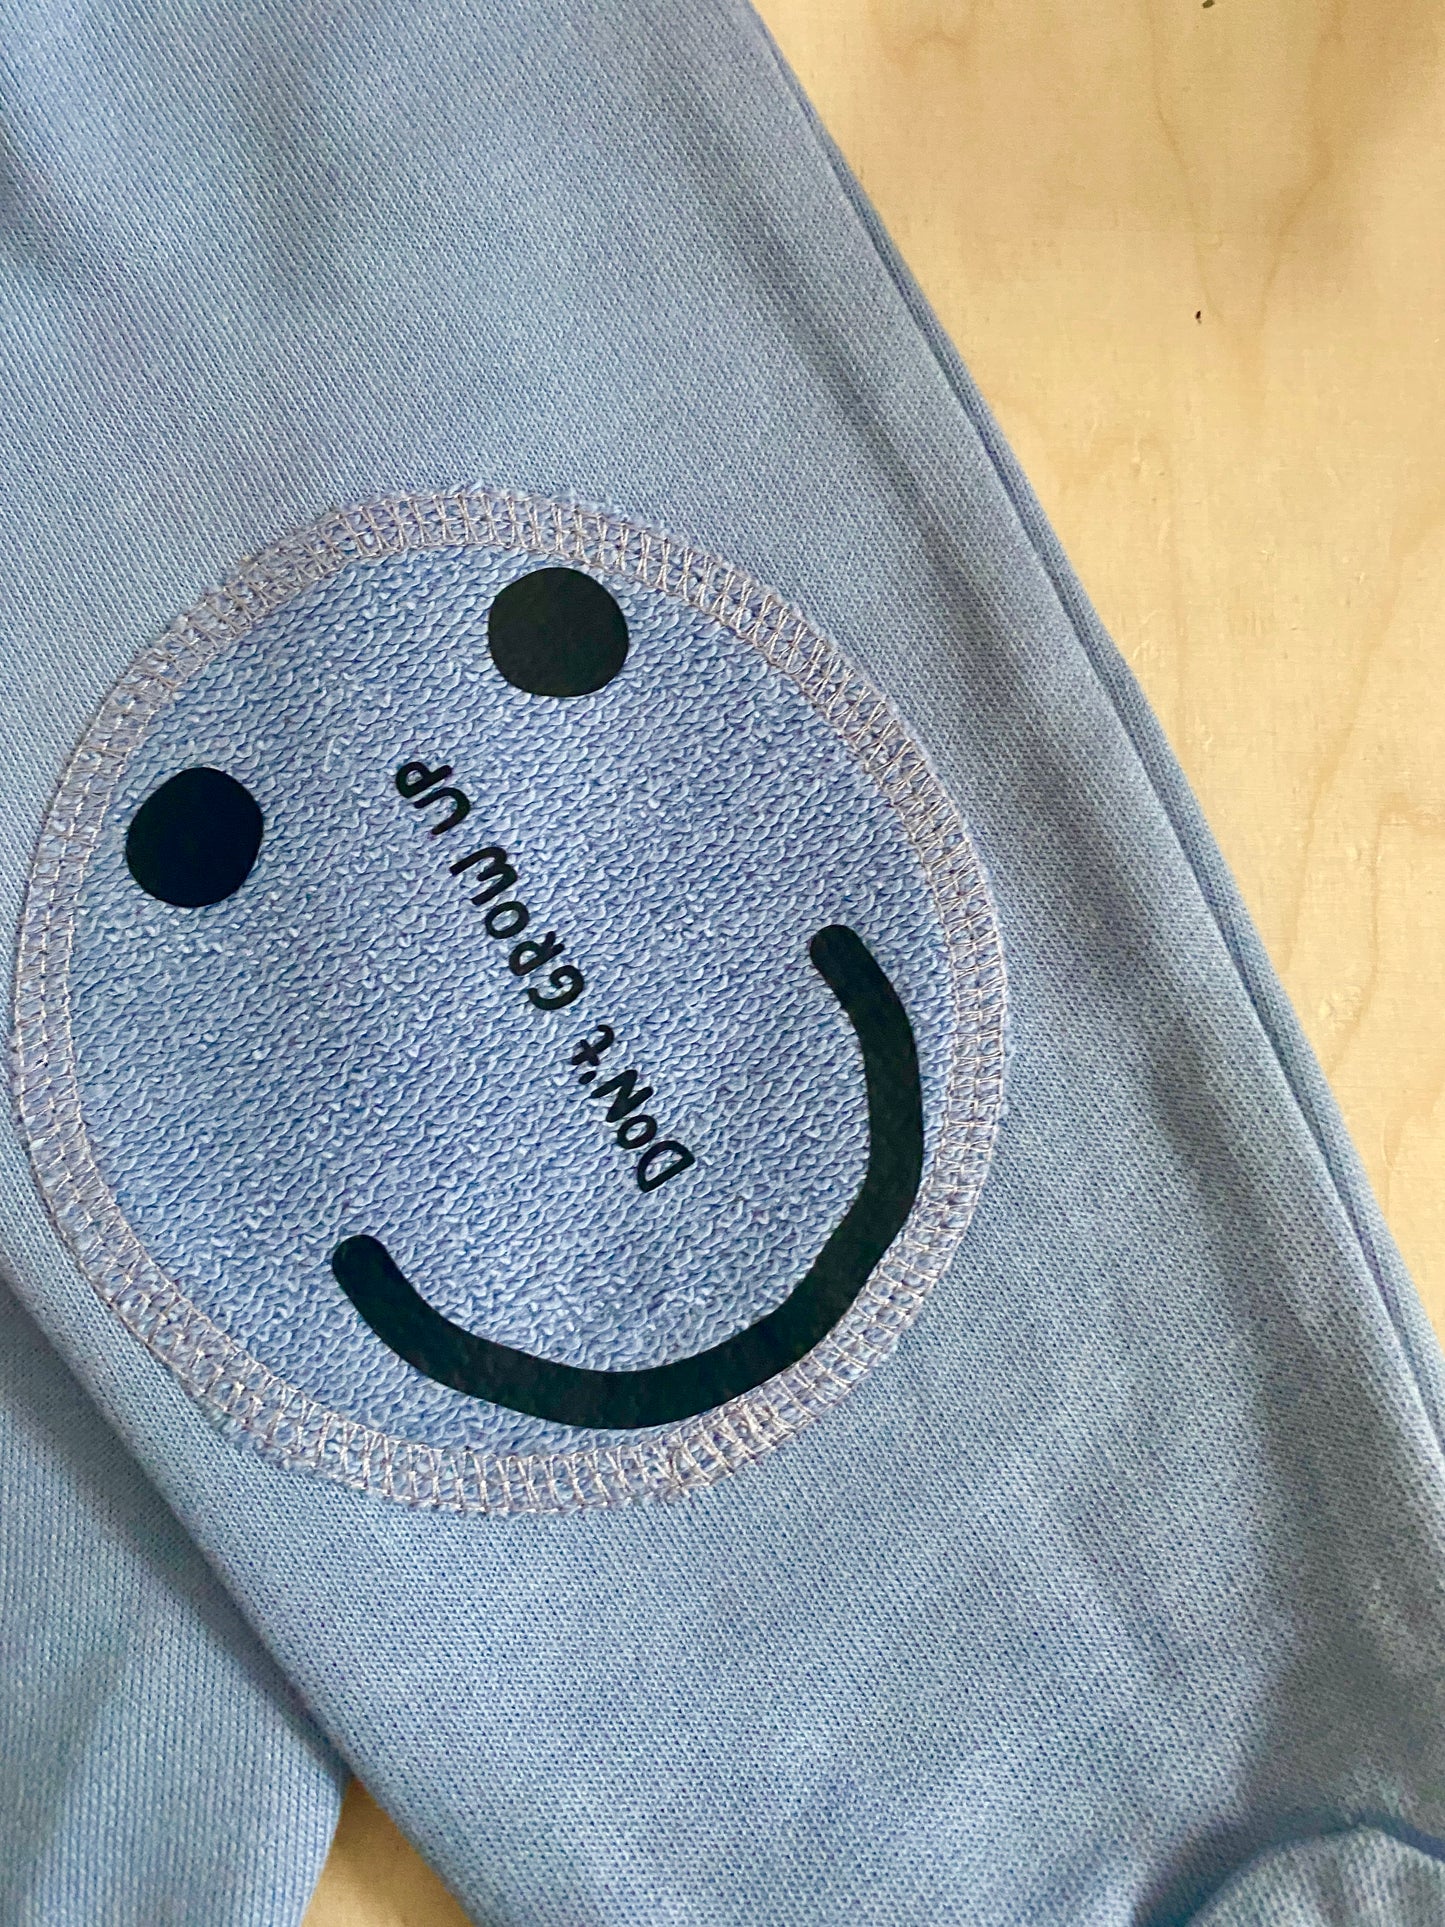 DON'T FORGET TO SMILE ON BLUE PATCHES PANTS